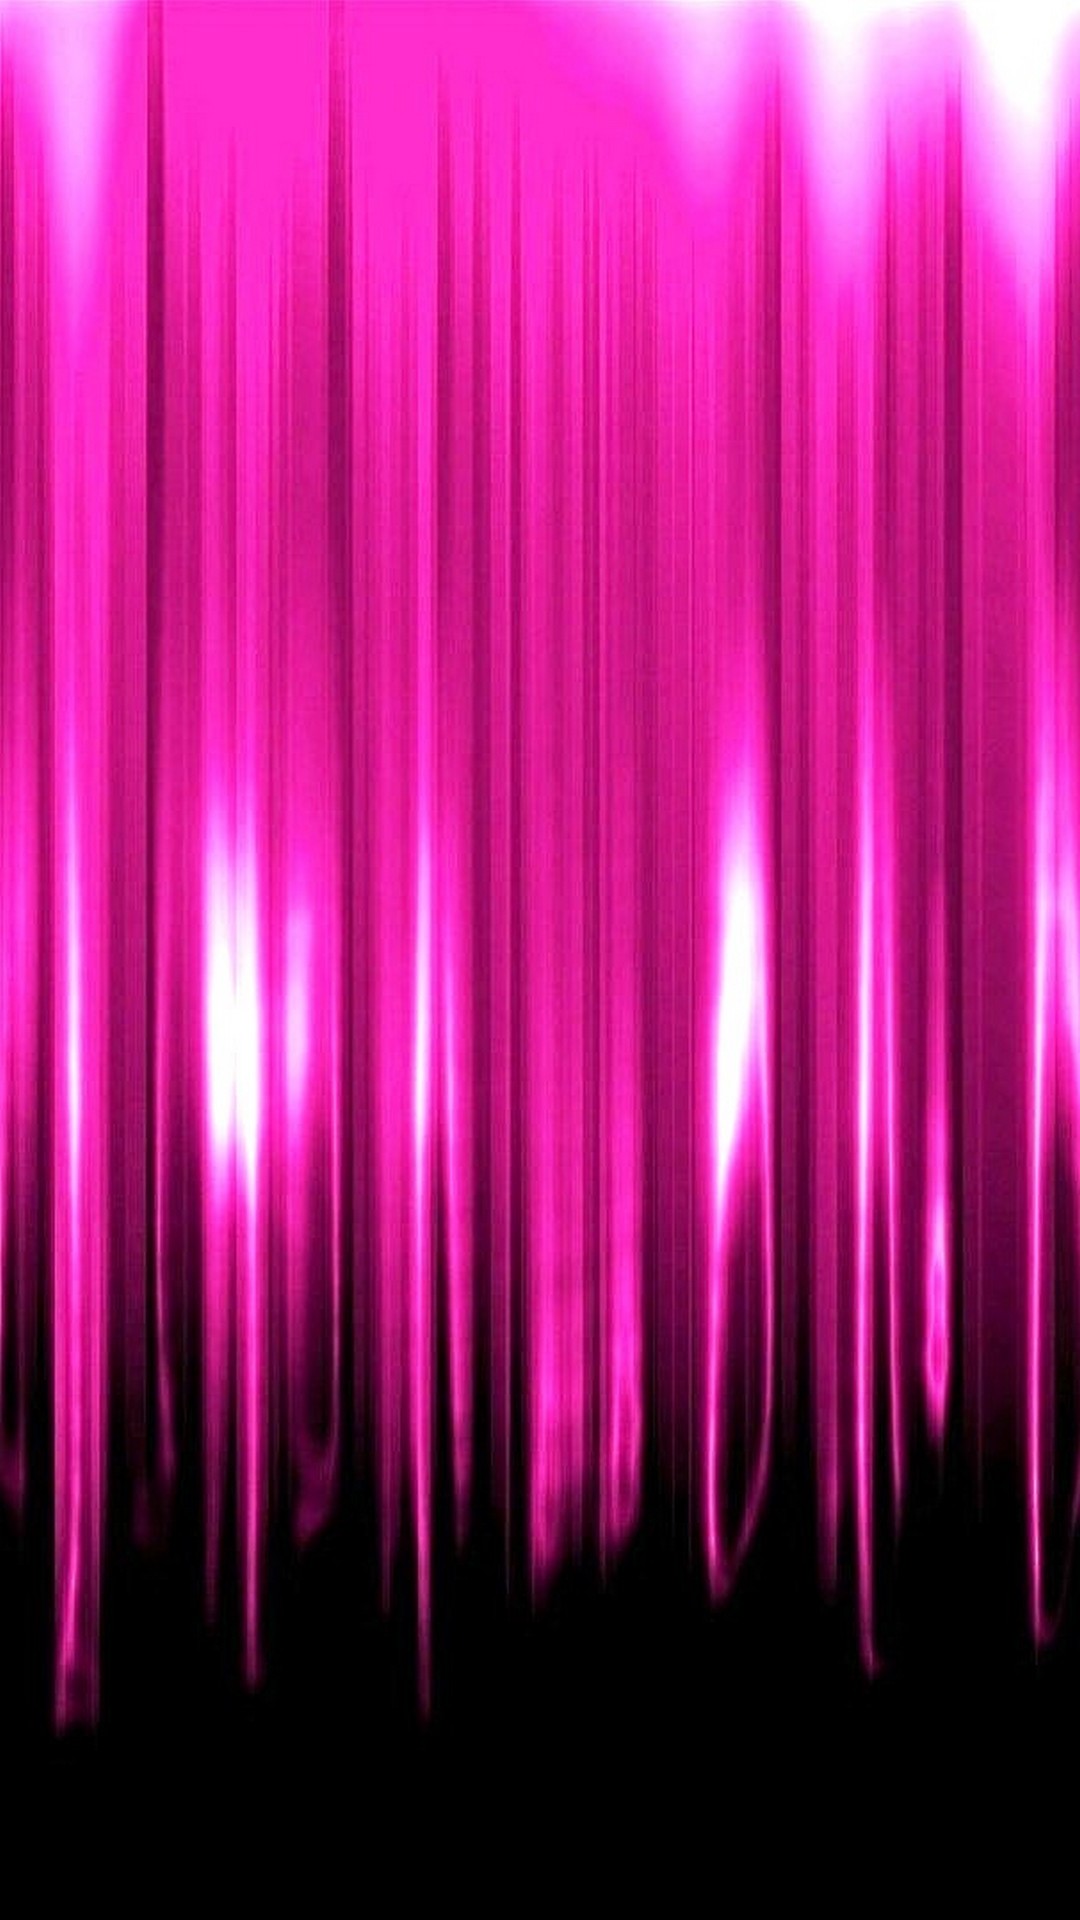 Light Pink Wallpaper Android with HD resolution 1080x1920